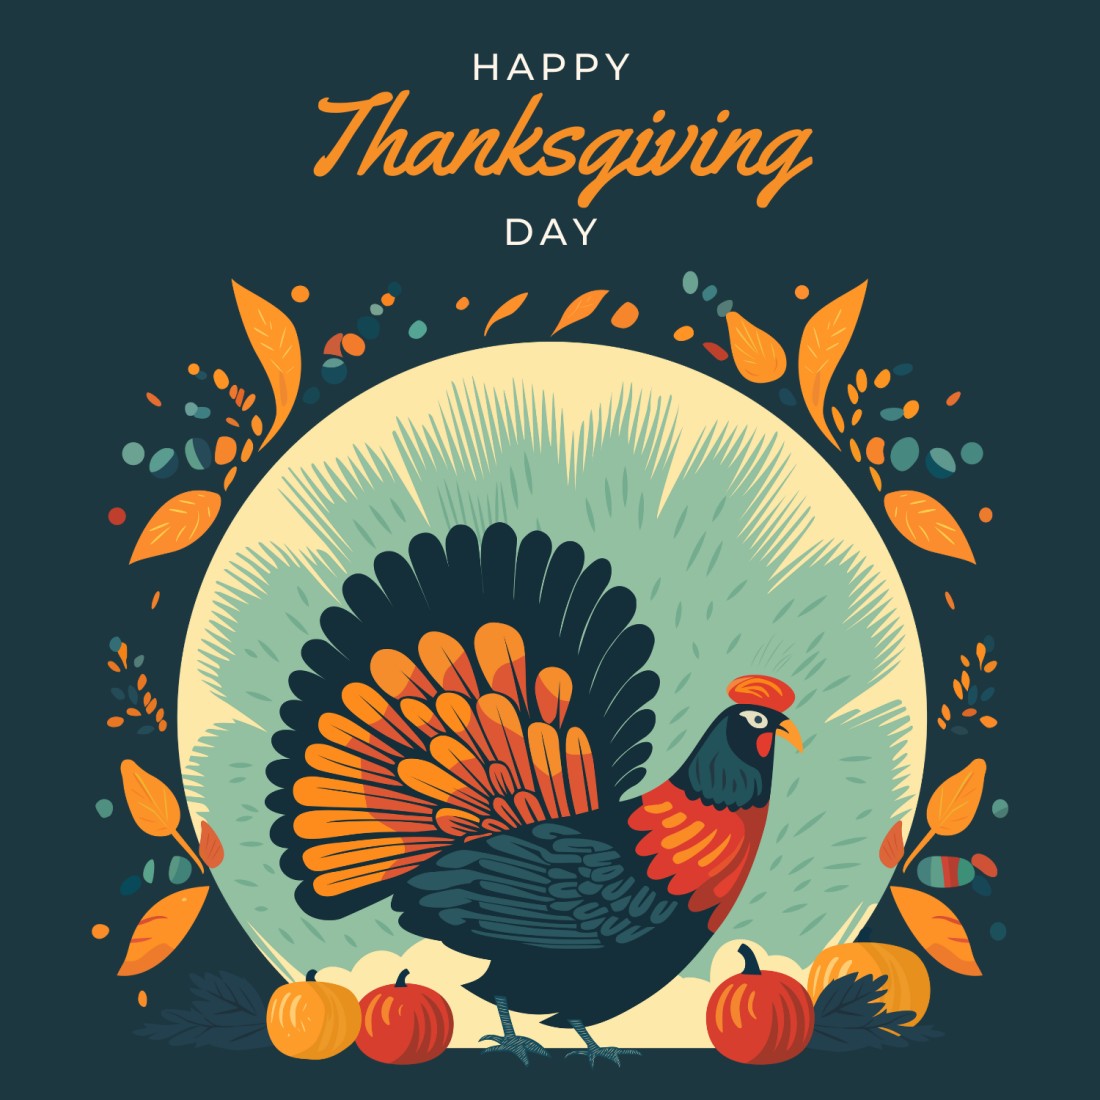 Only for $5 Best ThanksGiving Cards and wishes cover image.